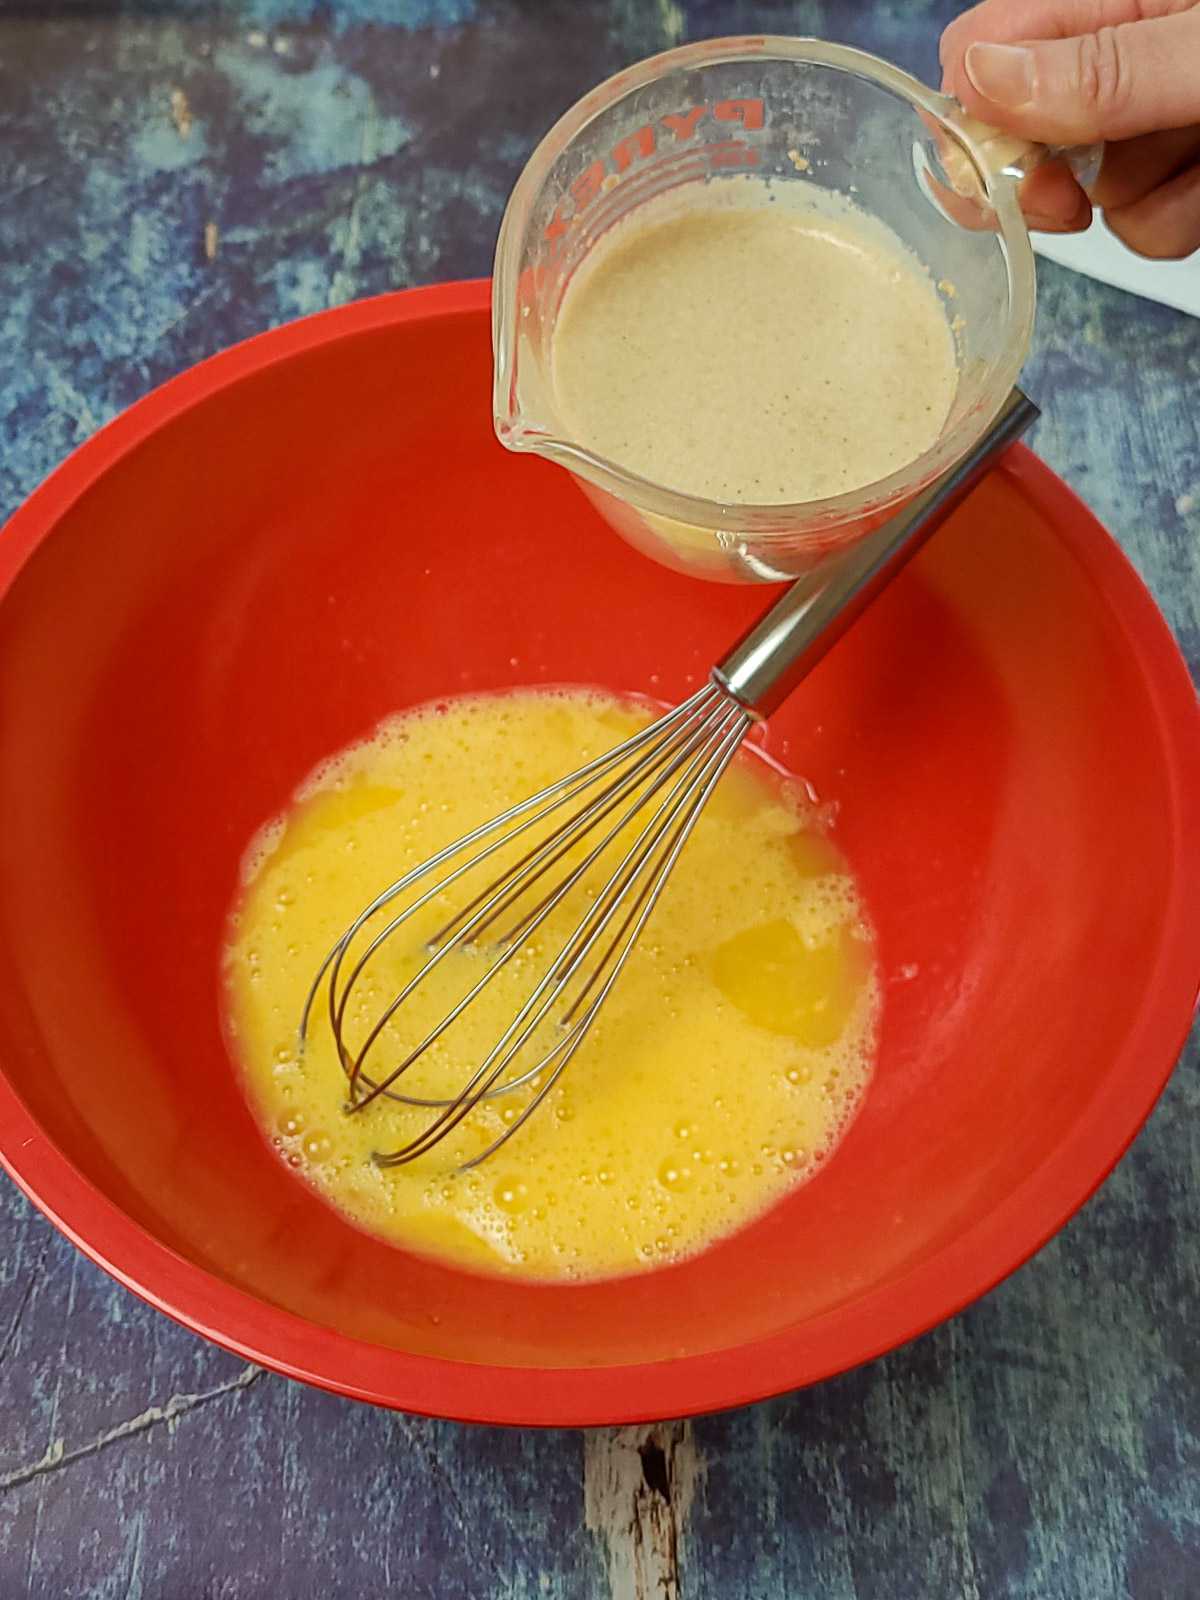 whipped eggs with yeast and milk be added